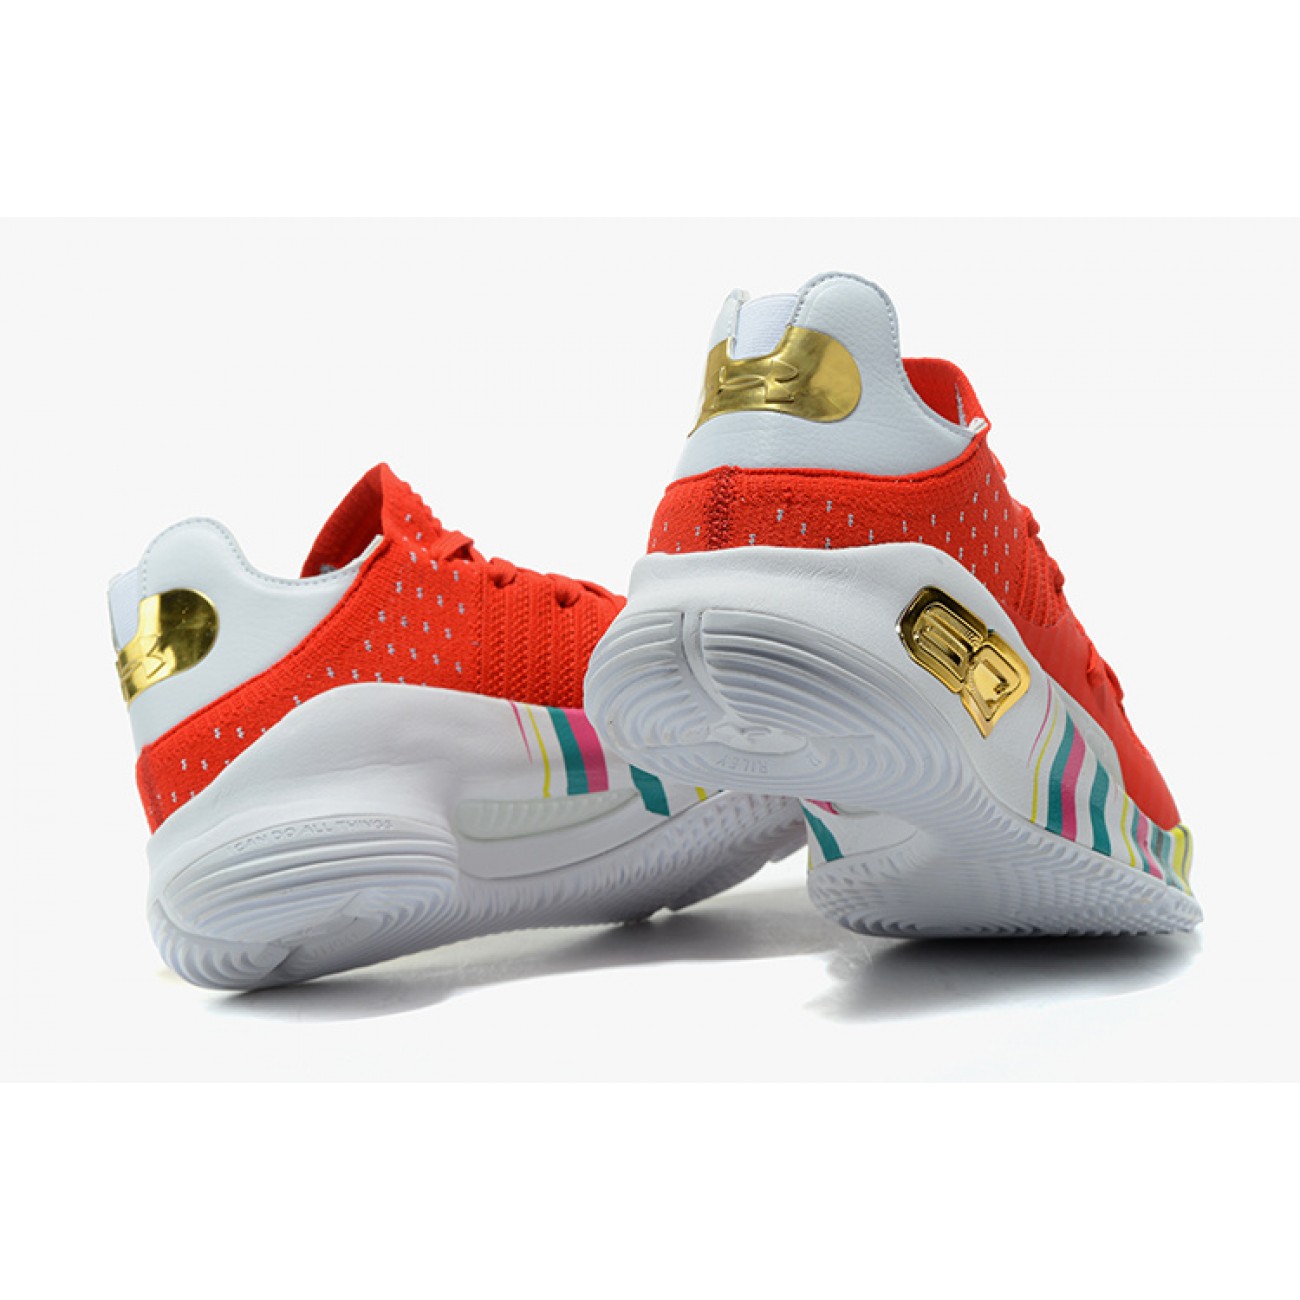 Under Armour UA Curry 4 WMN Low "The Year of Rooster" Red/Gold